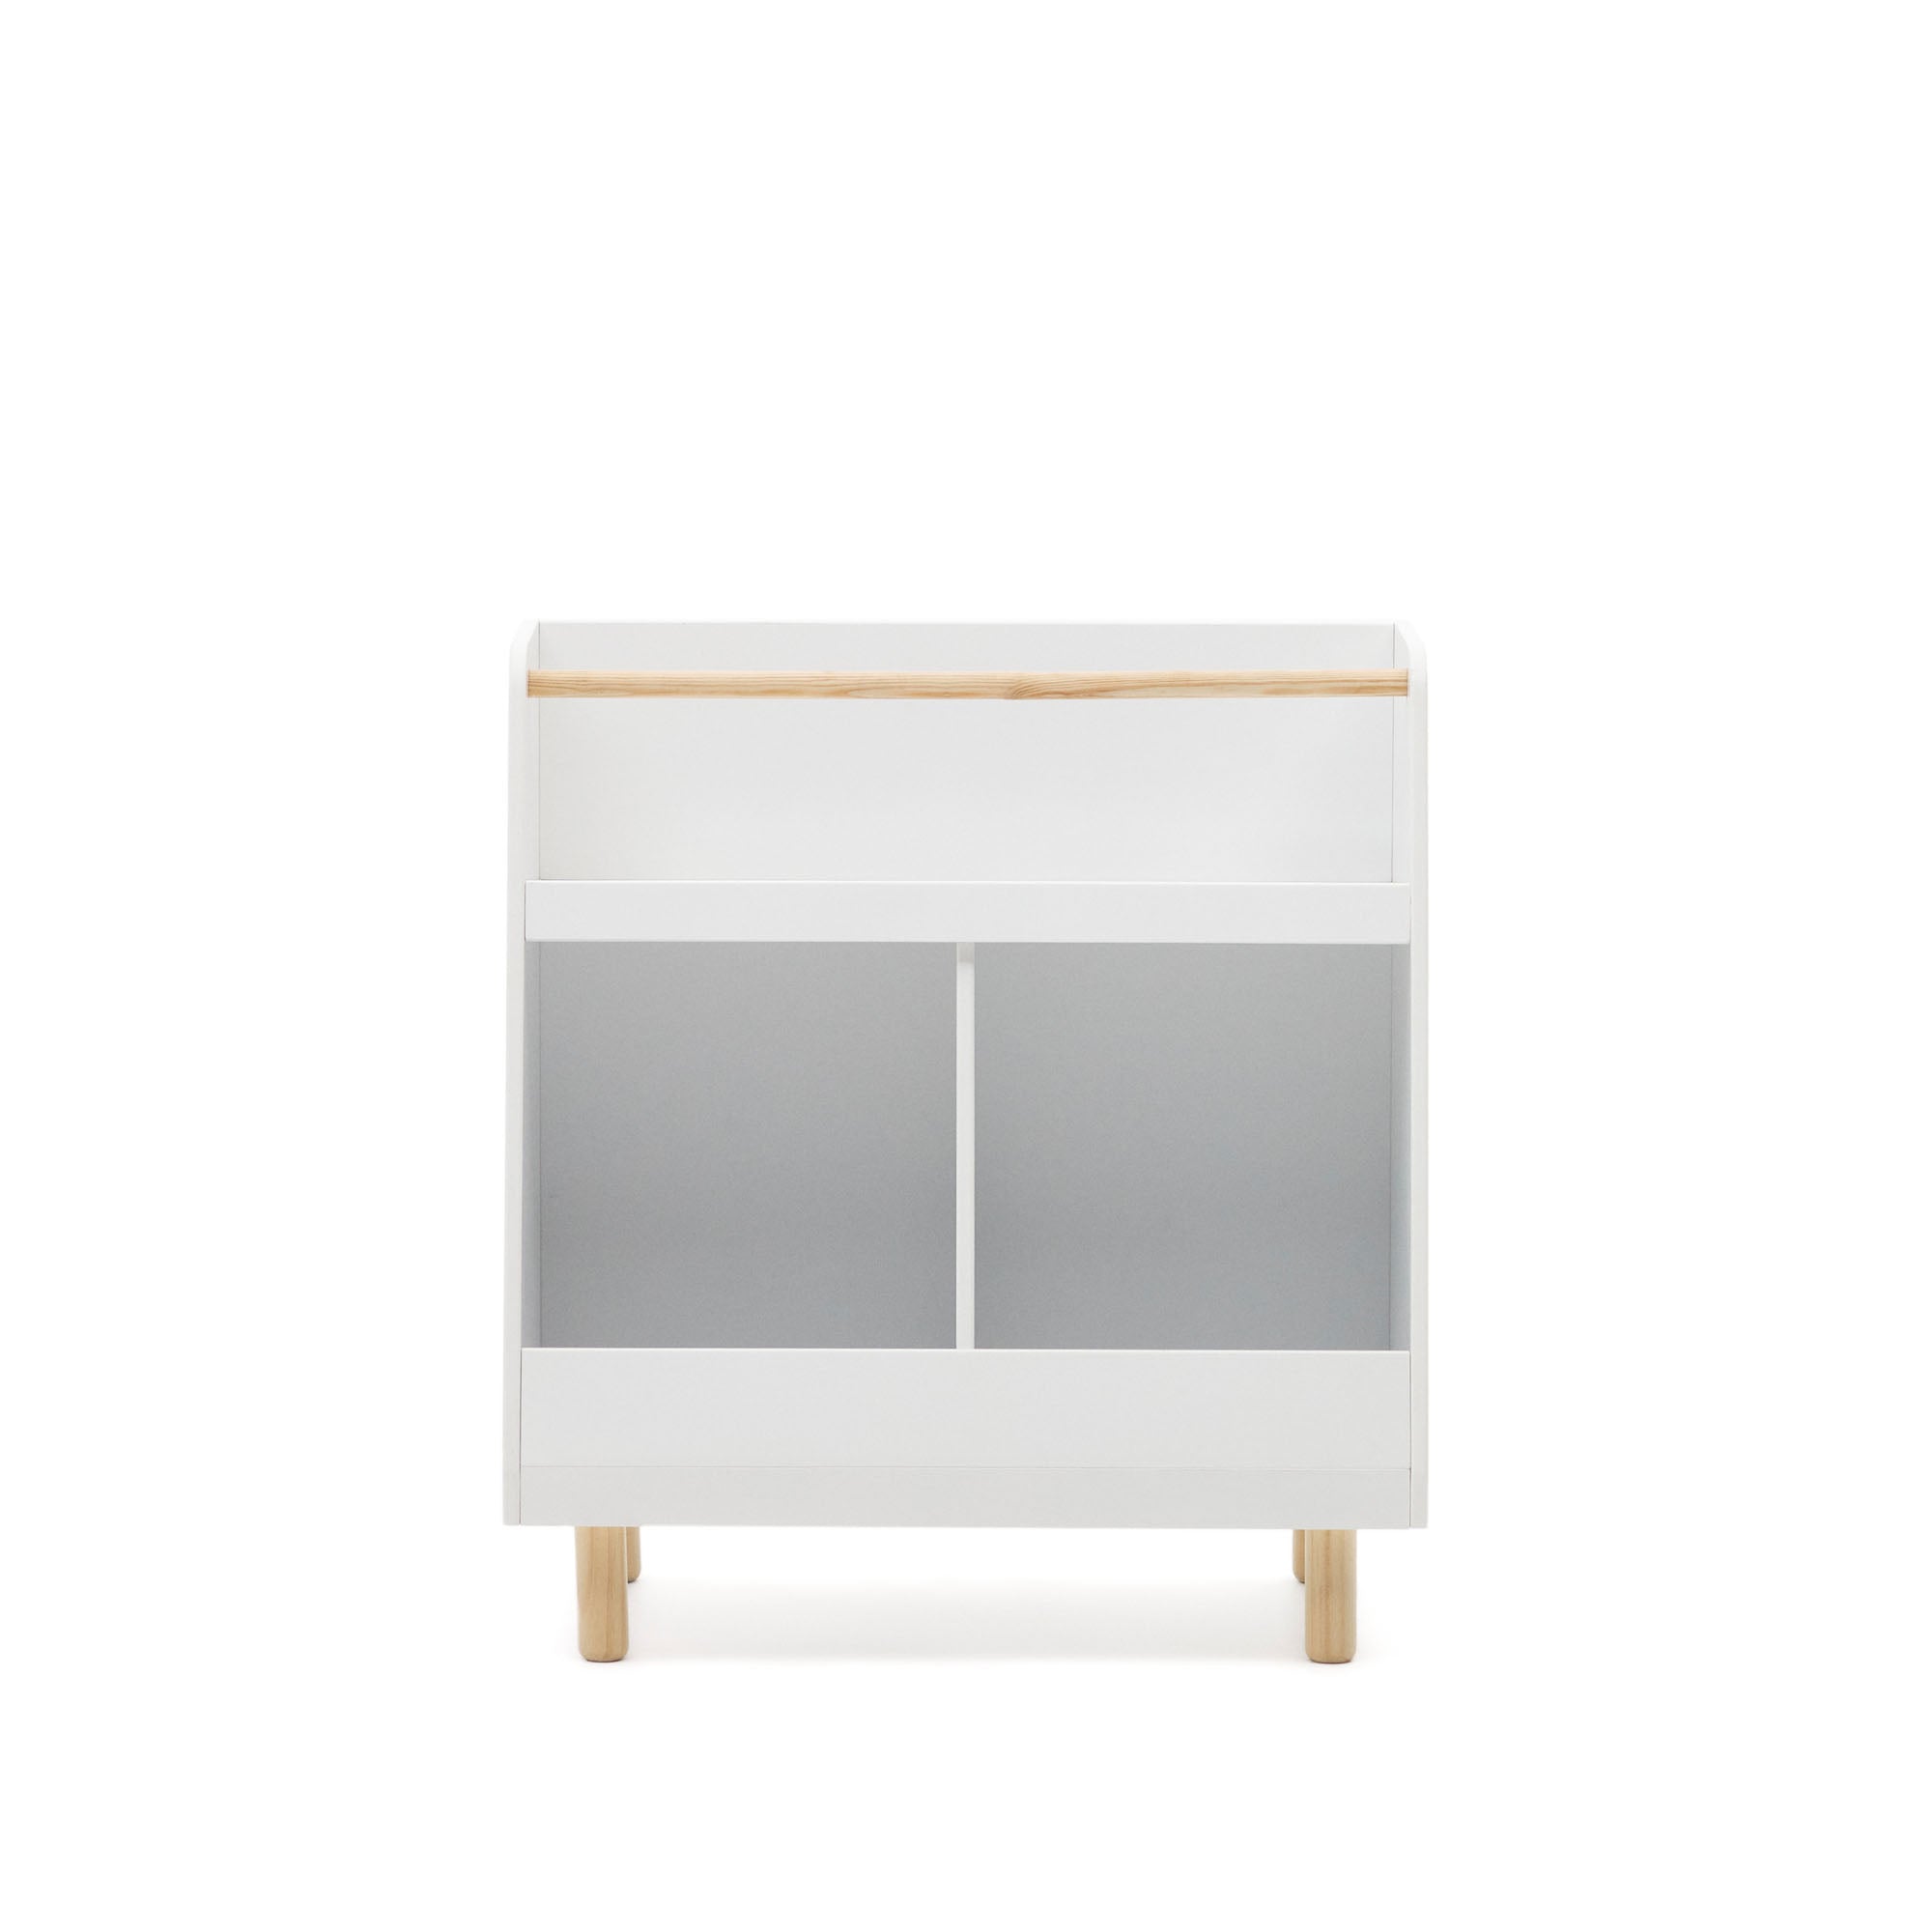 Serwa bookcase in white MDF with solid pine legs and bar FSC MIX Credit